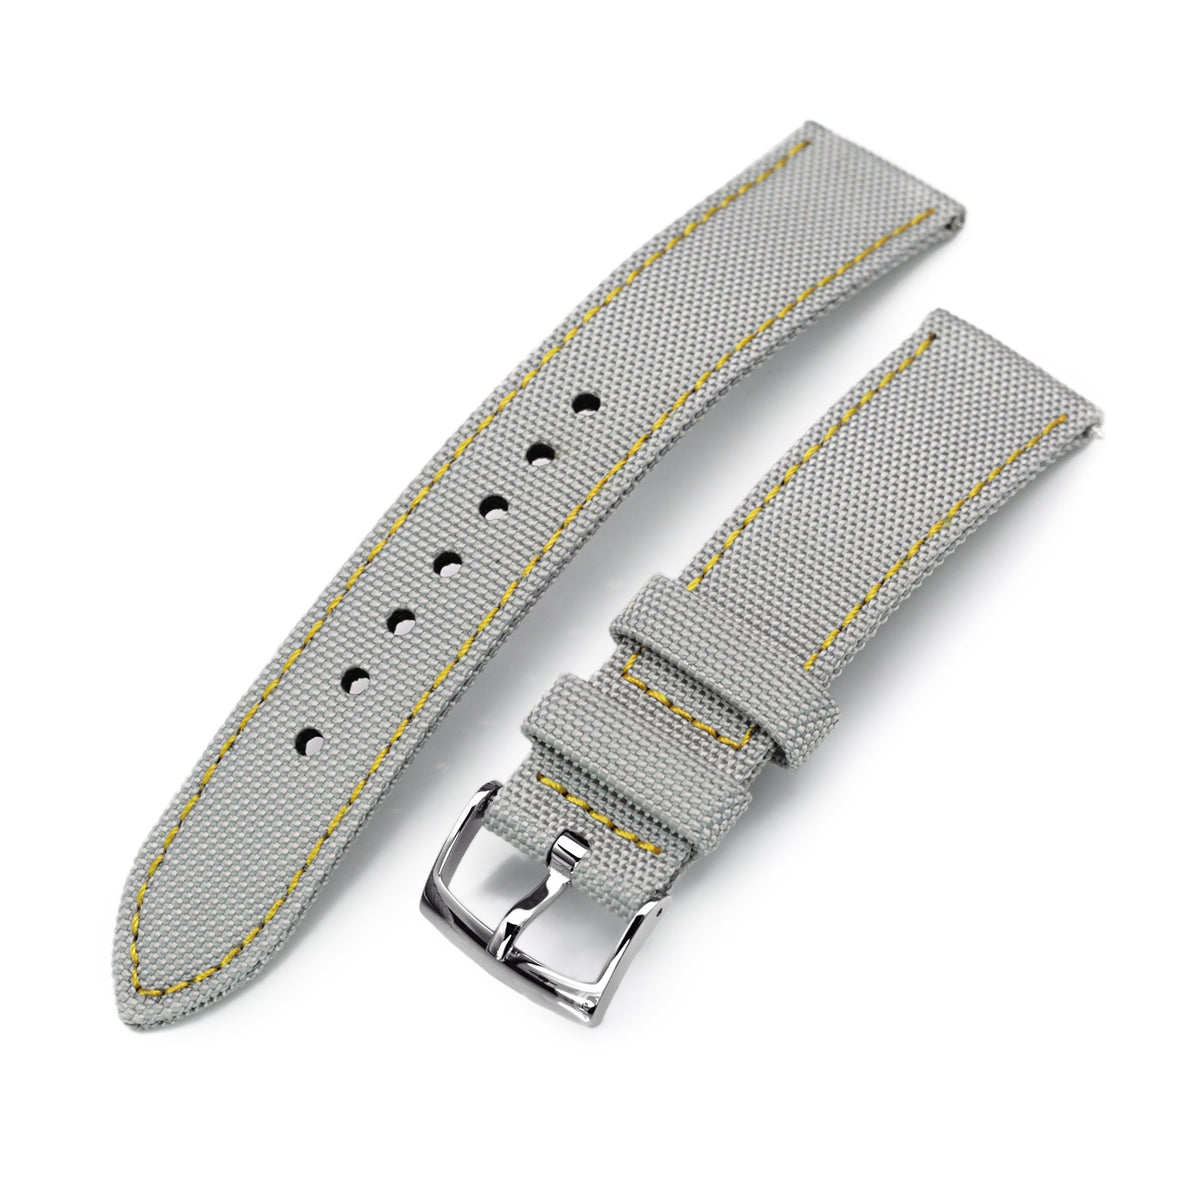 20mm Sailcloth Strap Light Grey Quick Release Nylon Watch Band, Yellow Stitching Strapcode Watch Bands